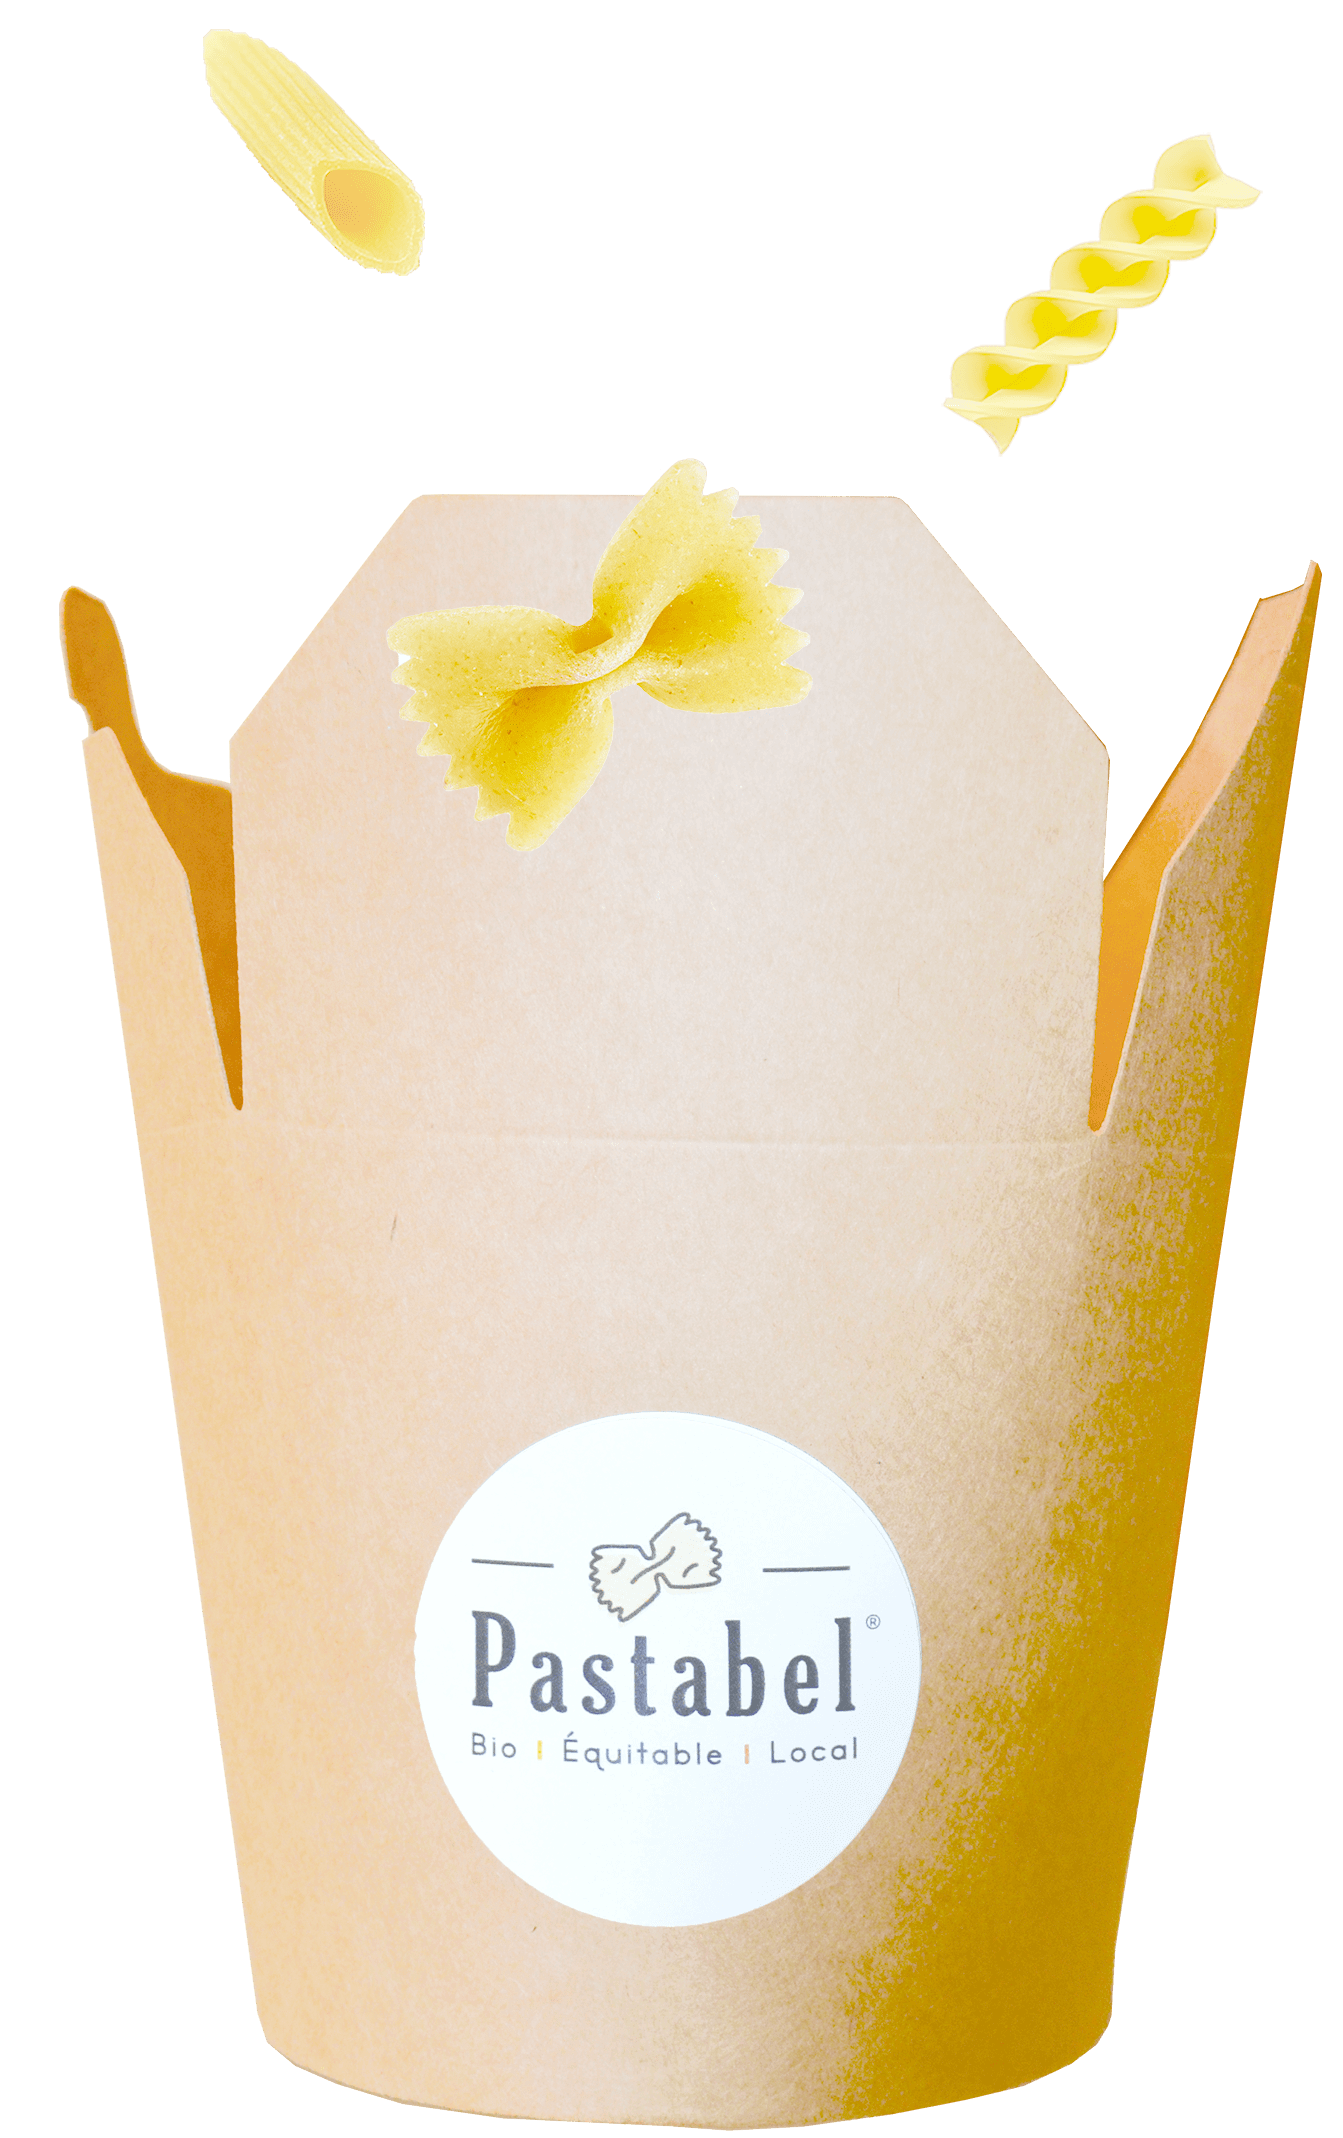 pasta-box-filled-penne